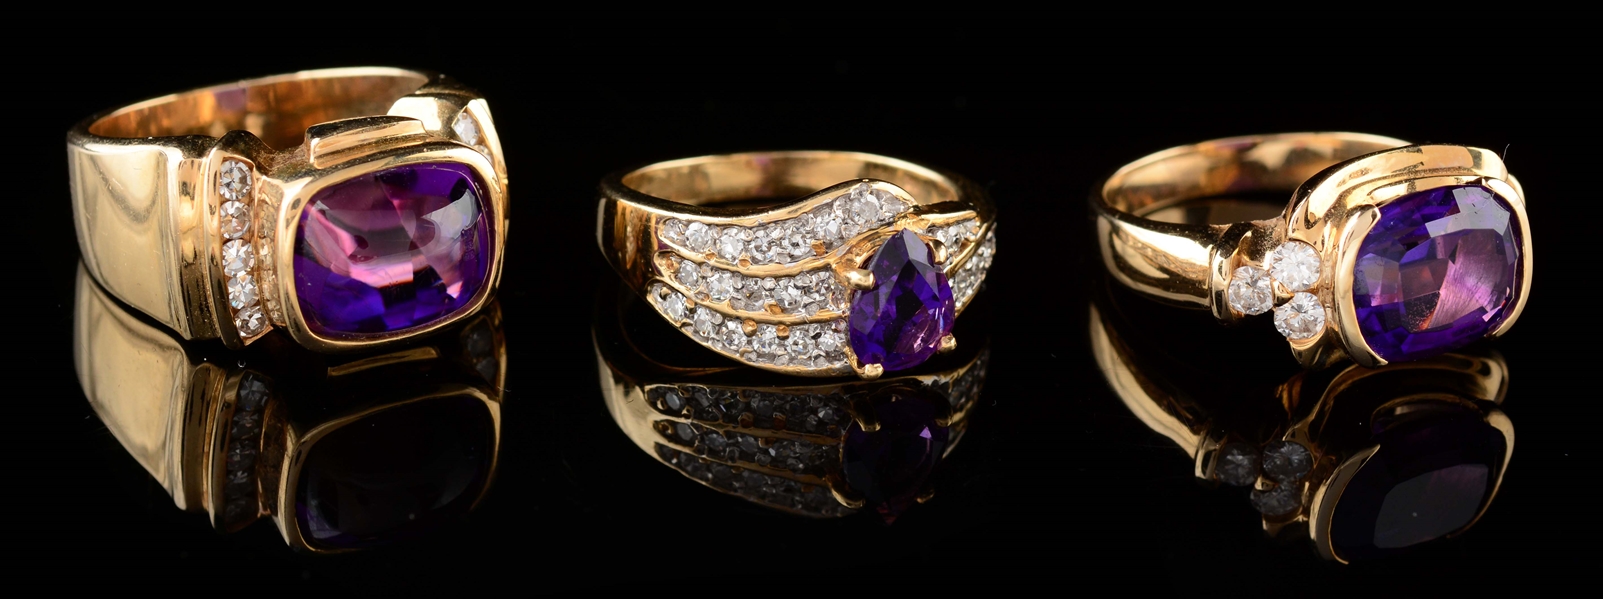 LOT OF 3: YELLOW GOLD AMETHYST AND DIAMOND RINGS.